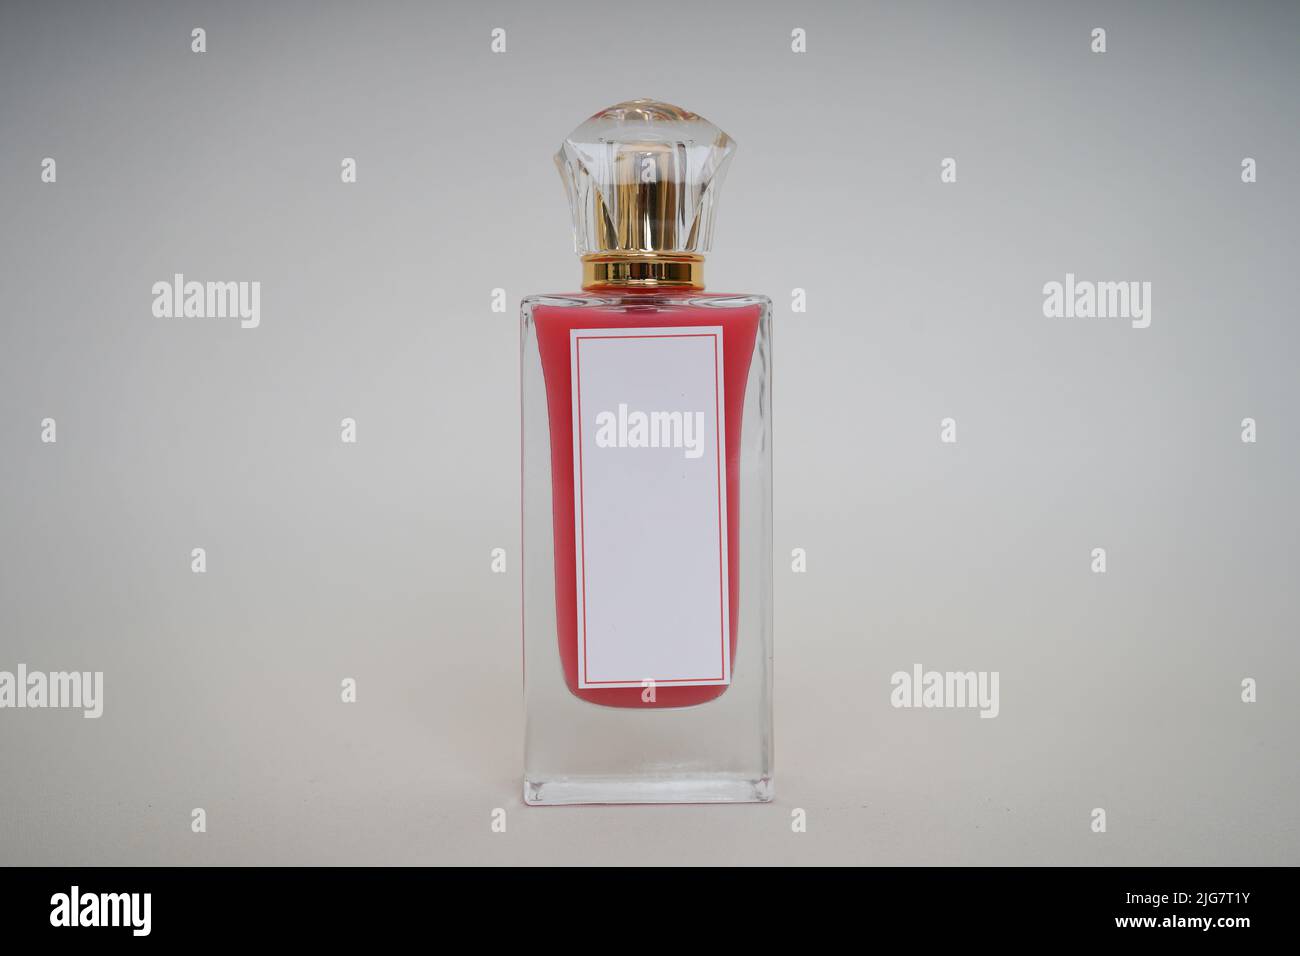 Red Perfume bottle and cap for branding isolated on white background, Red Perfume bottle mockup. Stock Photo